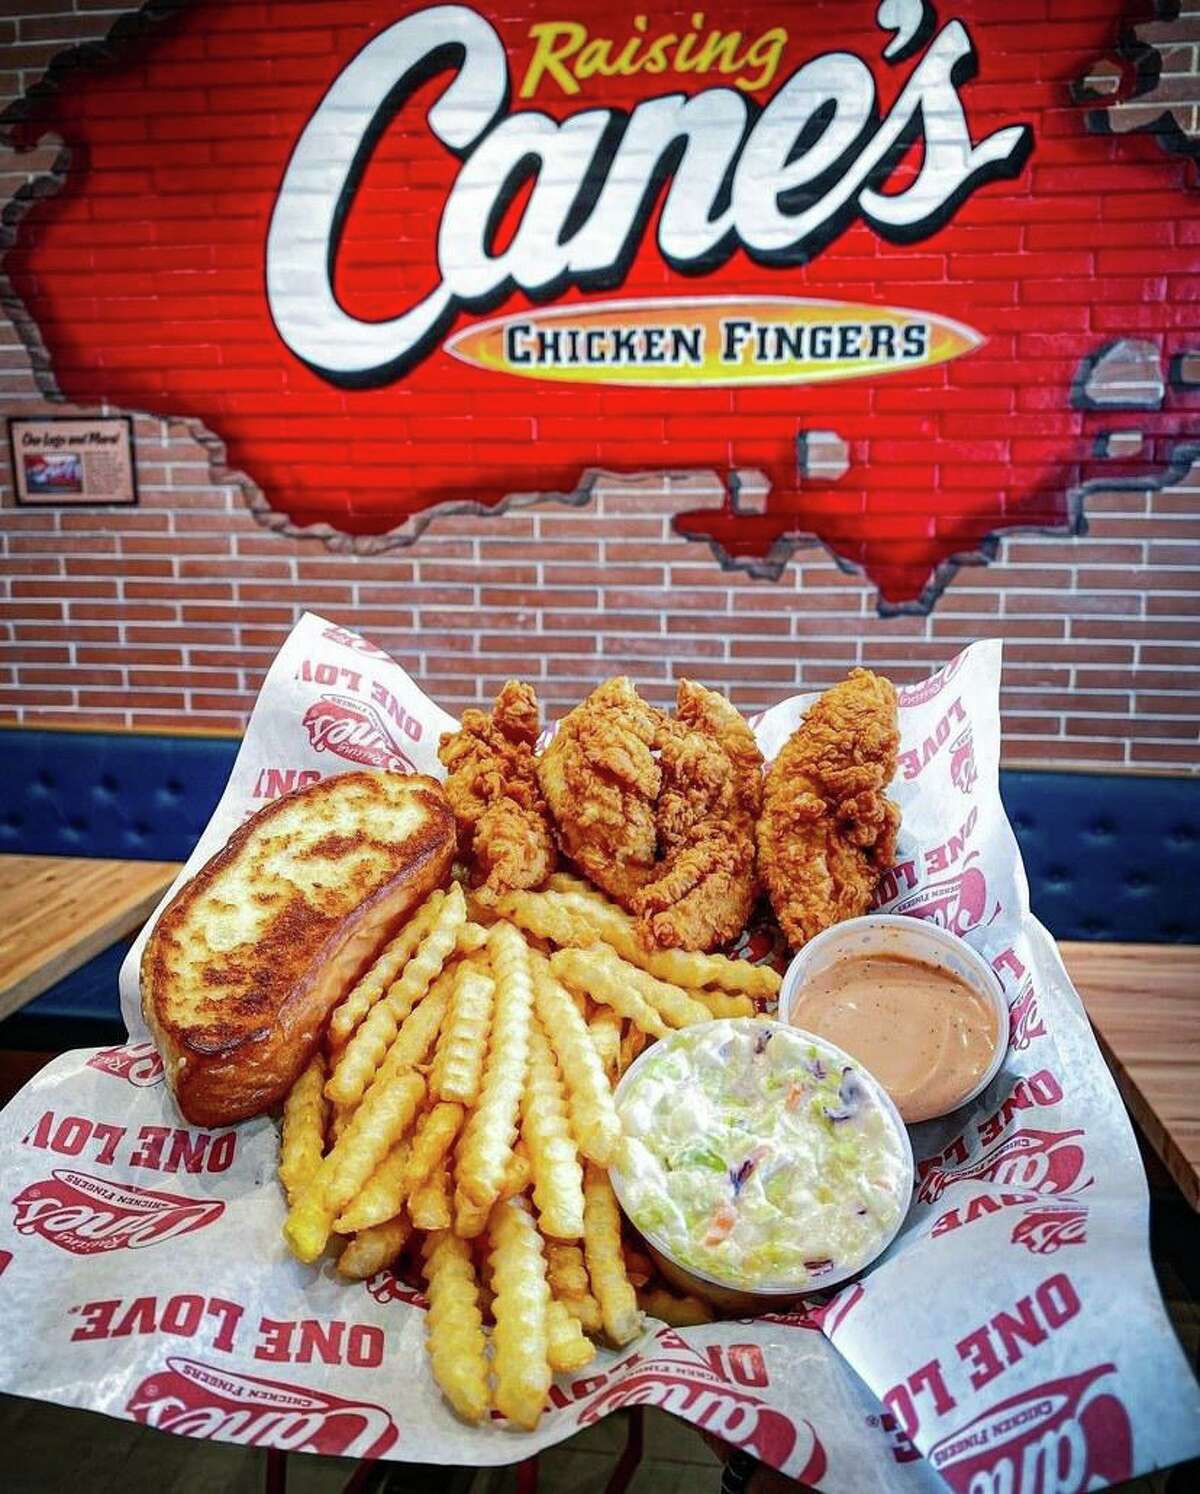 Raising Cane’s is bringing its chicken fingers, toast and special sauce to Deer Park. Remodeling has begun at 8055 Spencer in the building previously occupied by Bush’s Chicken, with an opening expected by year’s end.